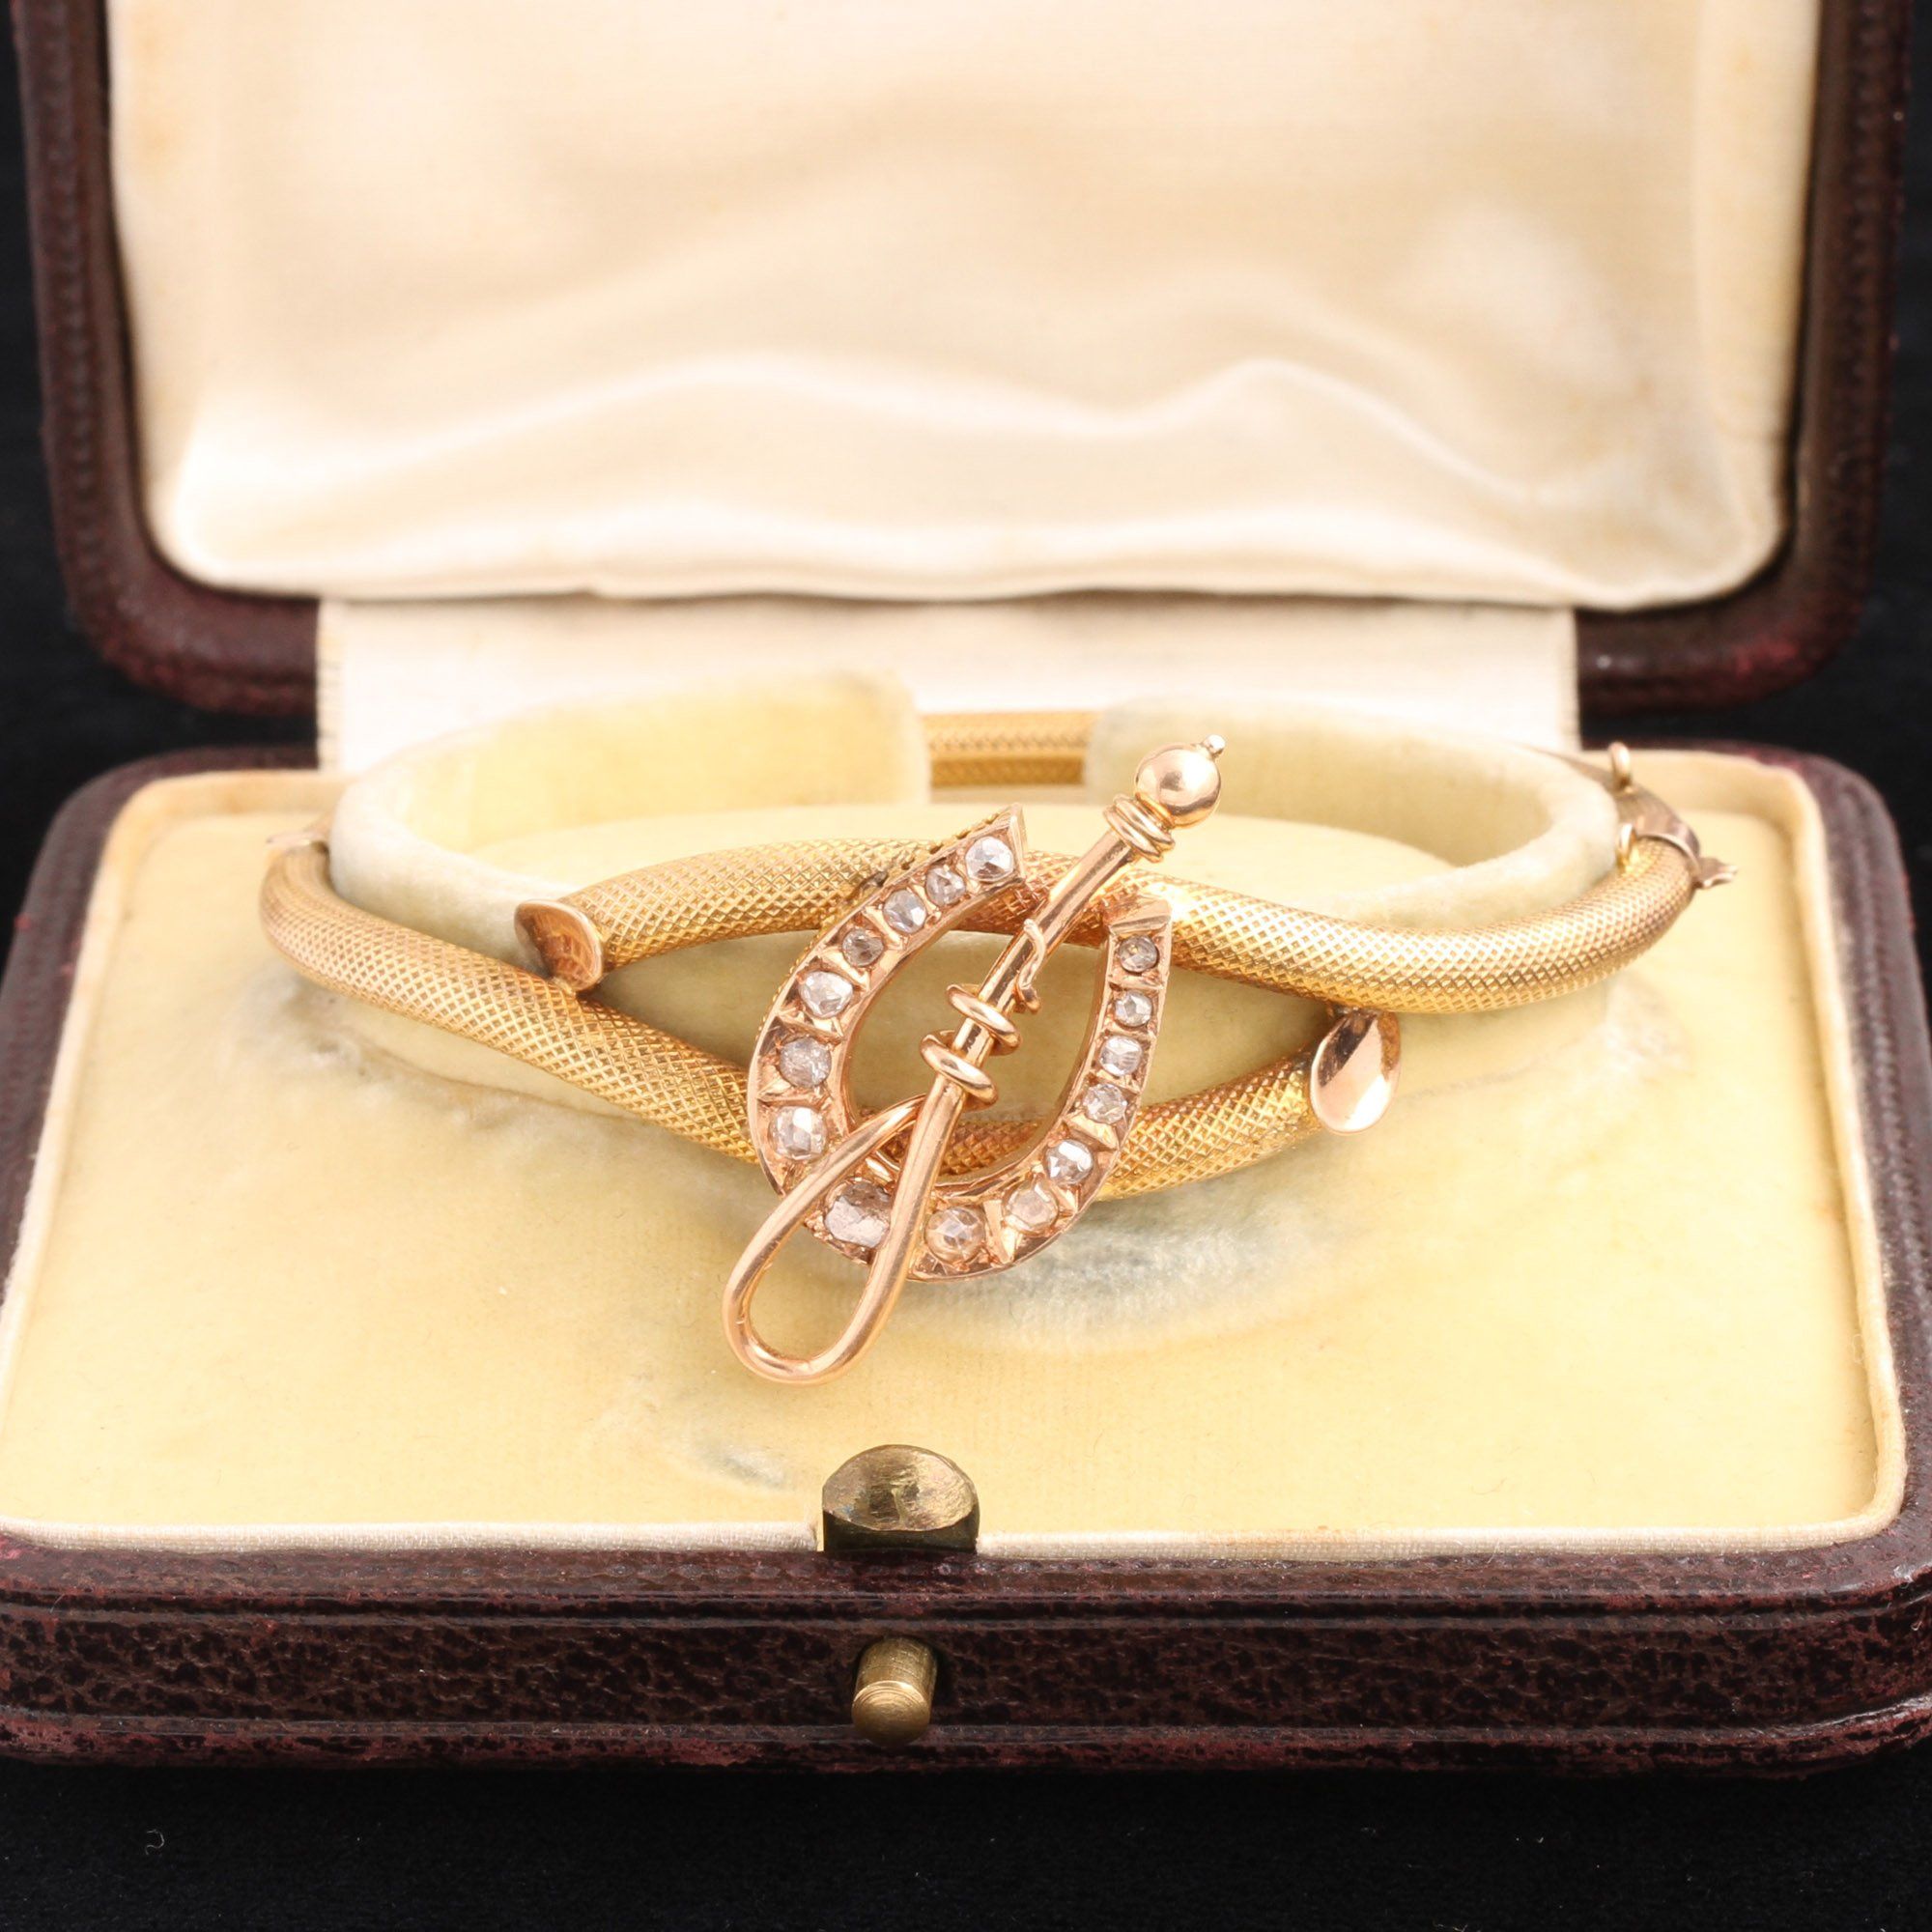 Detail of Late 19th Century French Equestrian Diamond Bangle in box